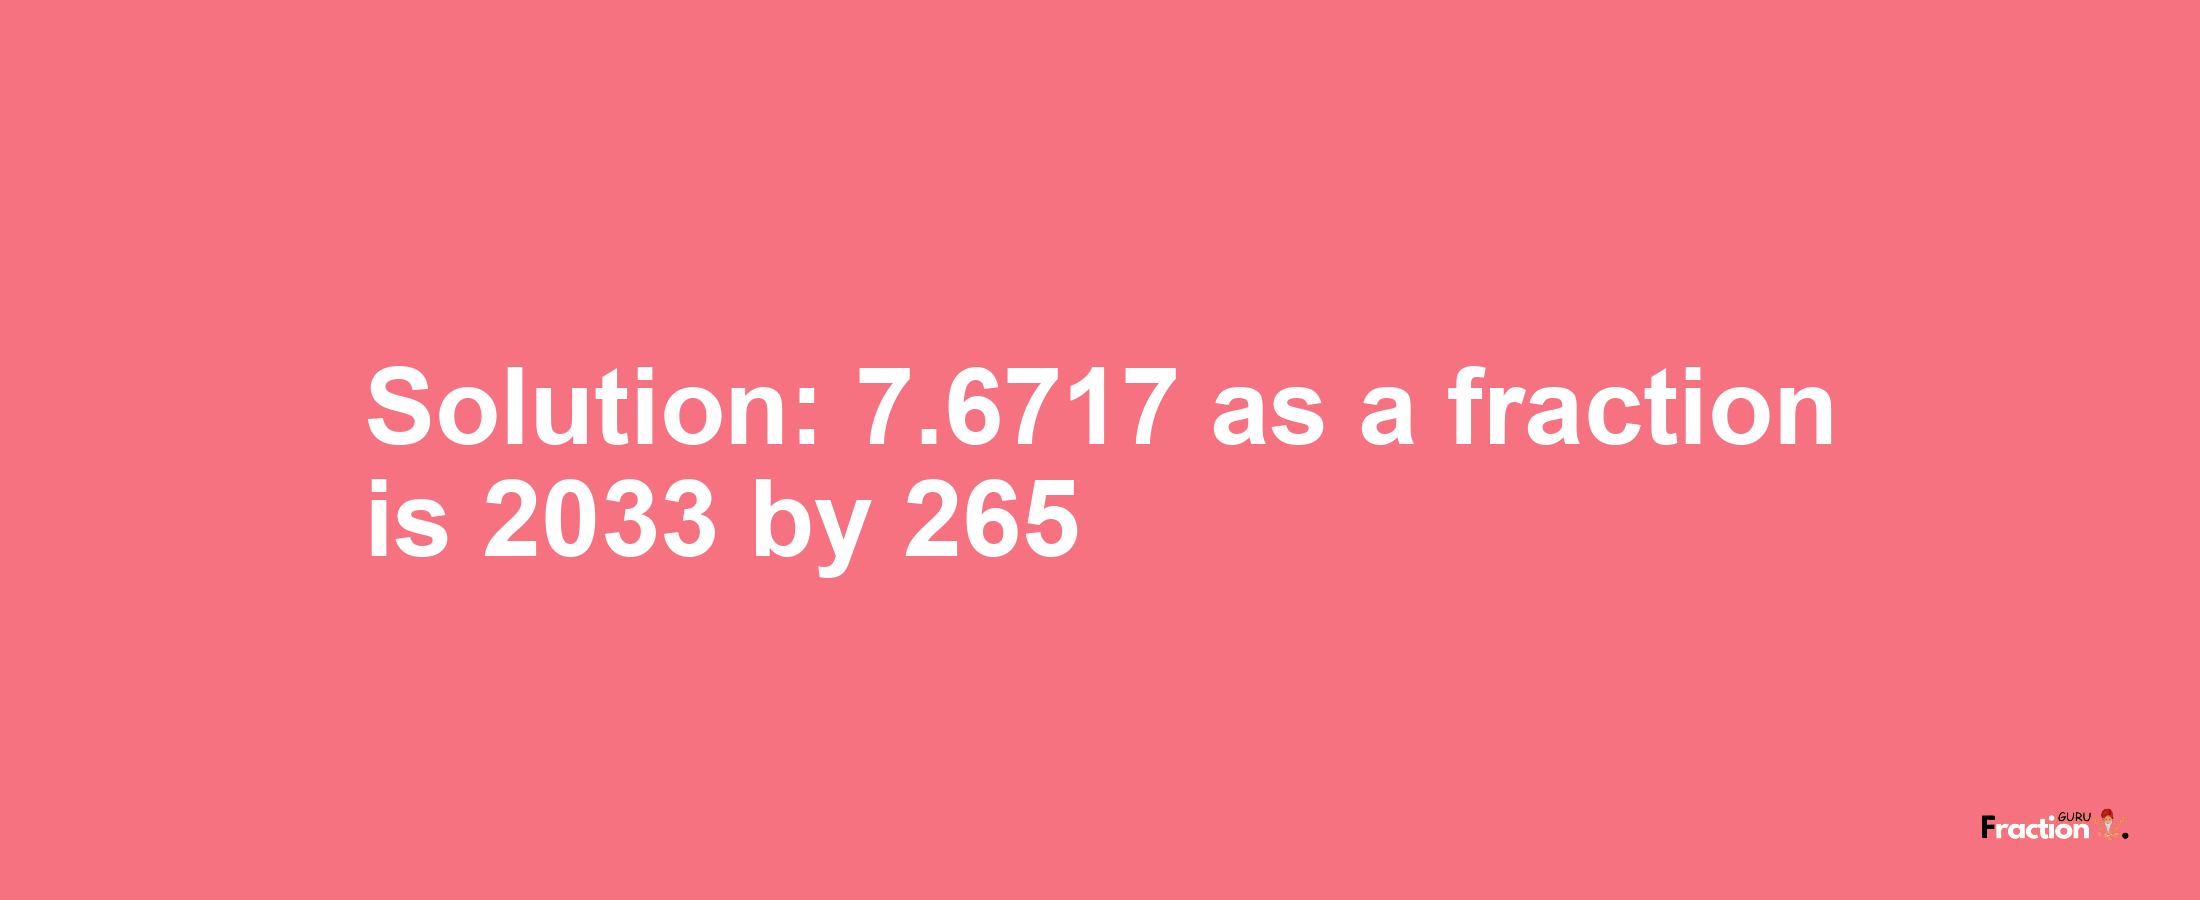 Solution:7.6717 as a fraction is 2033/265